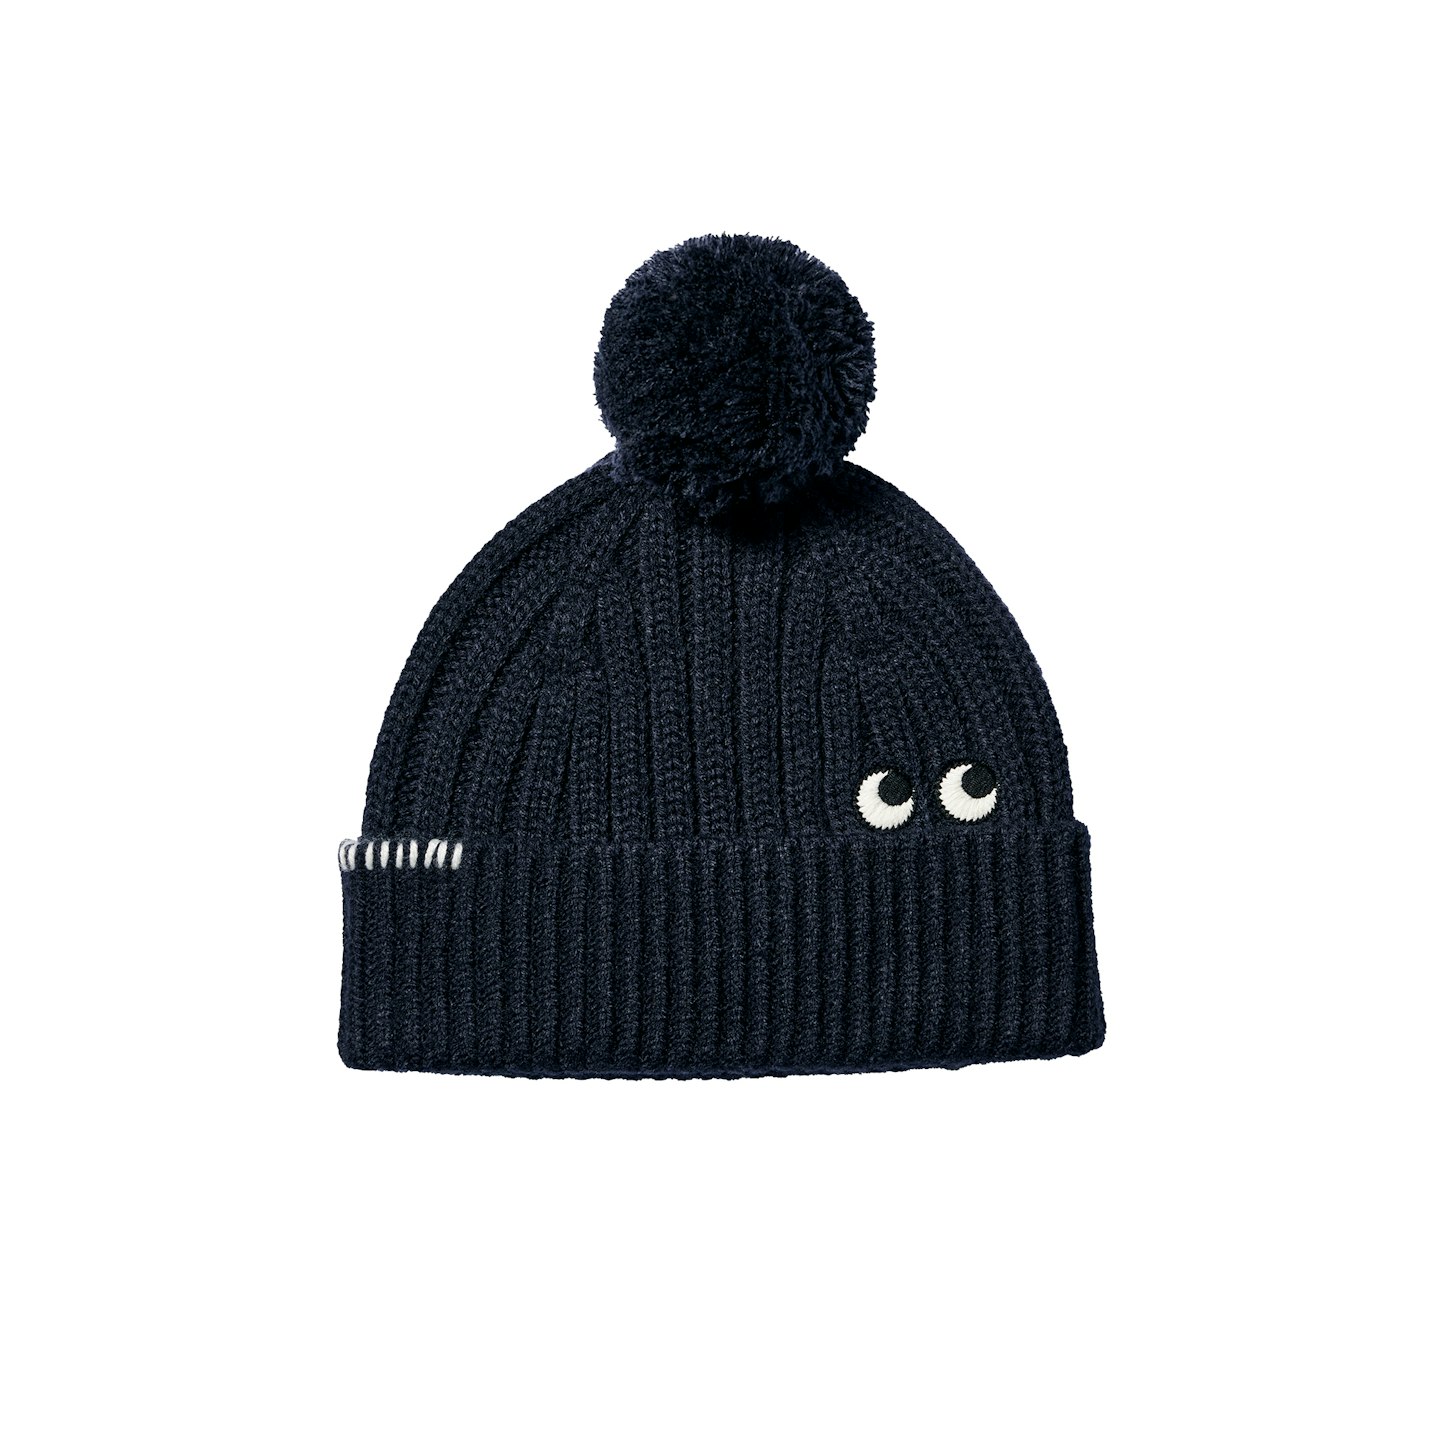 Uniqlo x Anya Hindmarch, Kids Heattech Knitted Cap